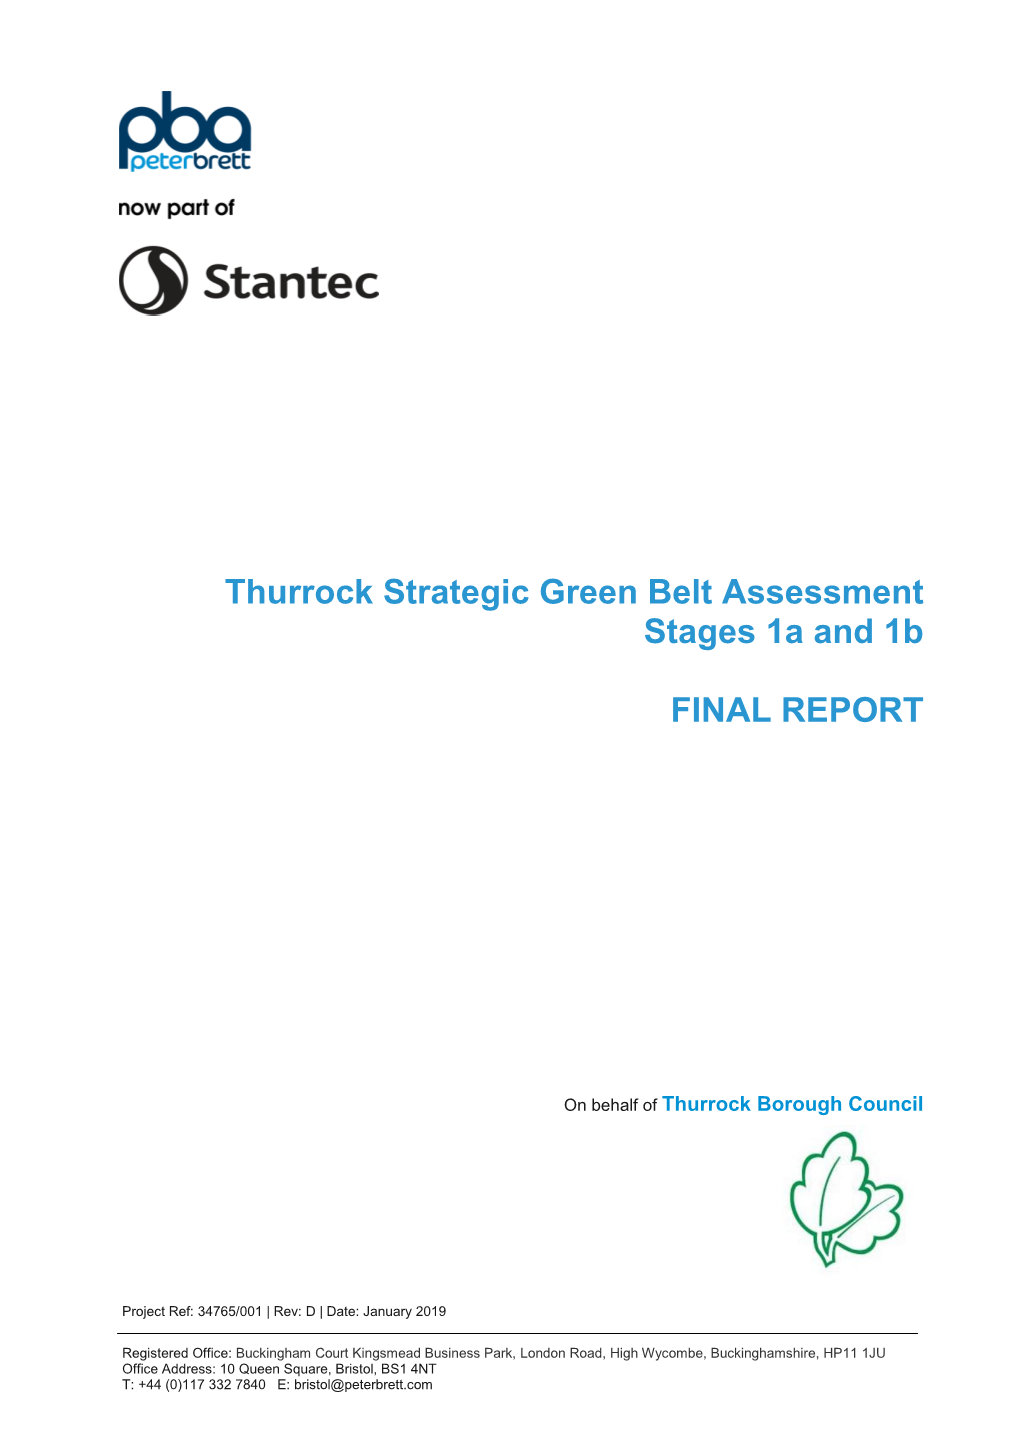 Thurrock Strategic Green Belt Assessment Stages 1A and 1B FINAL REPORT